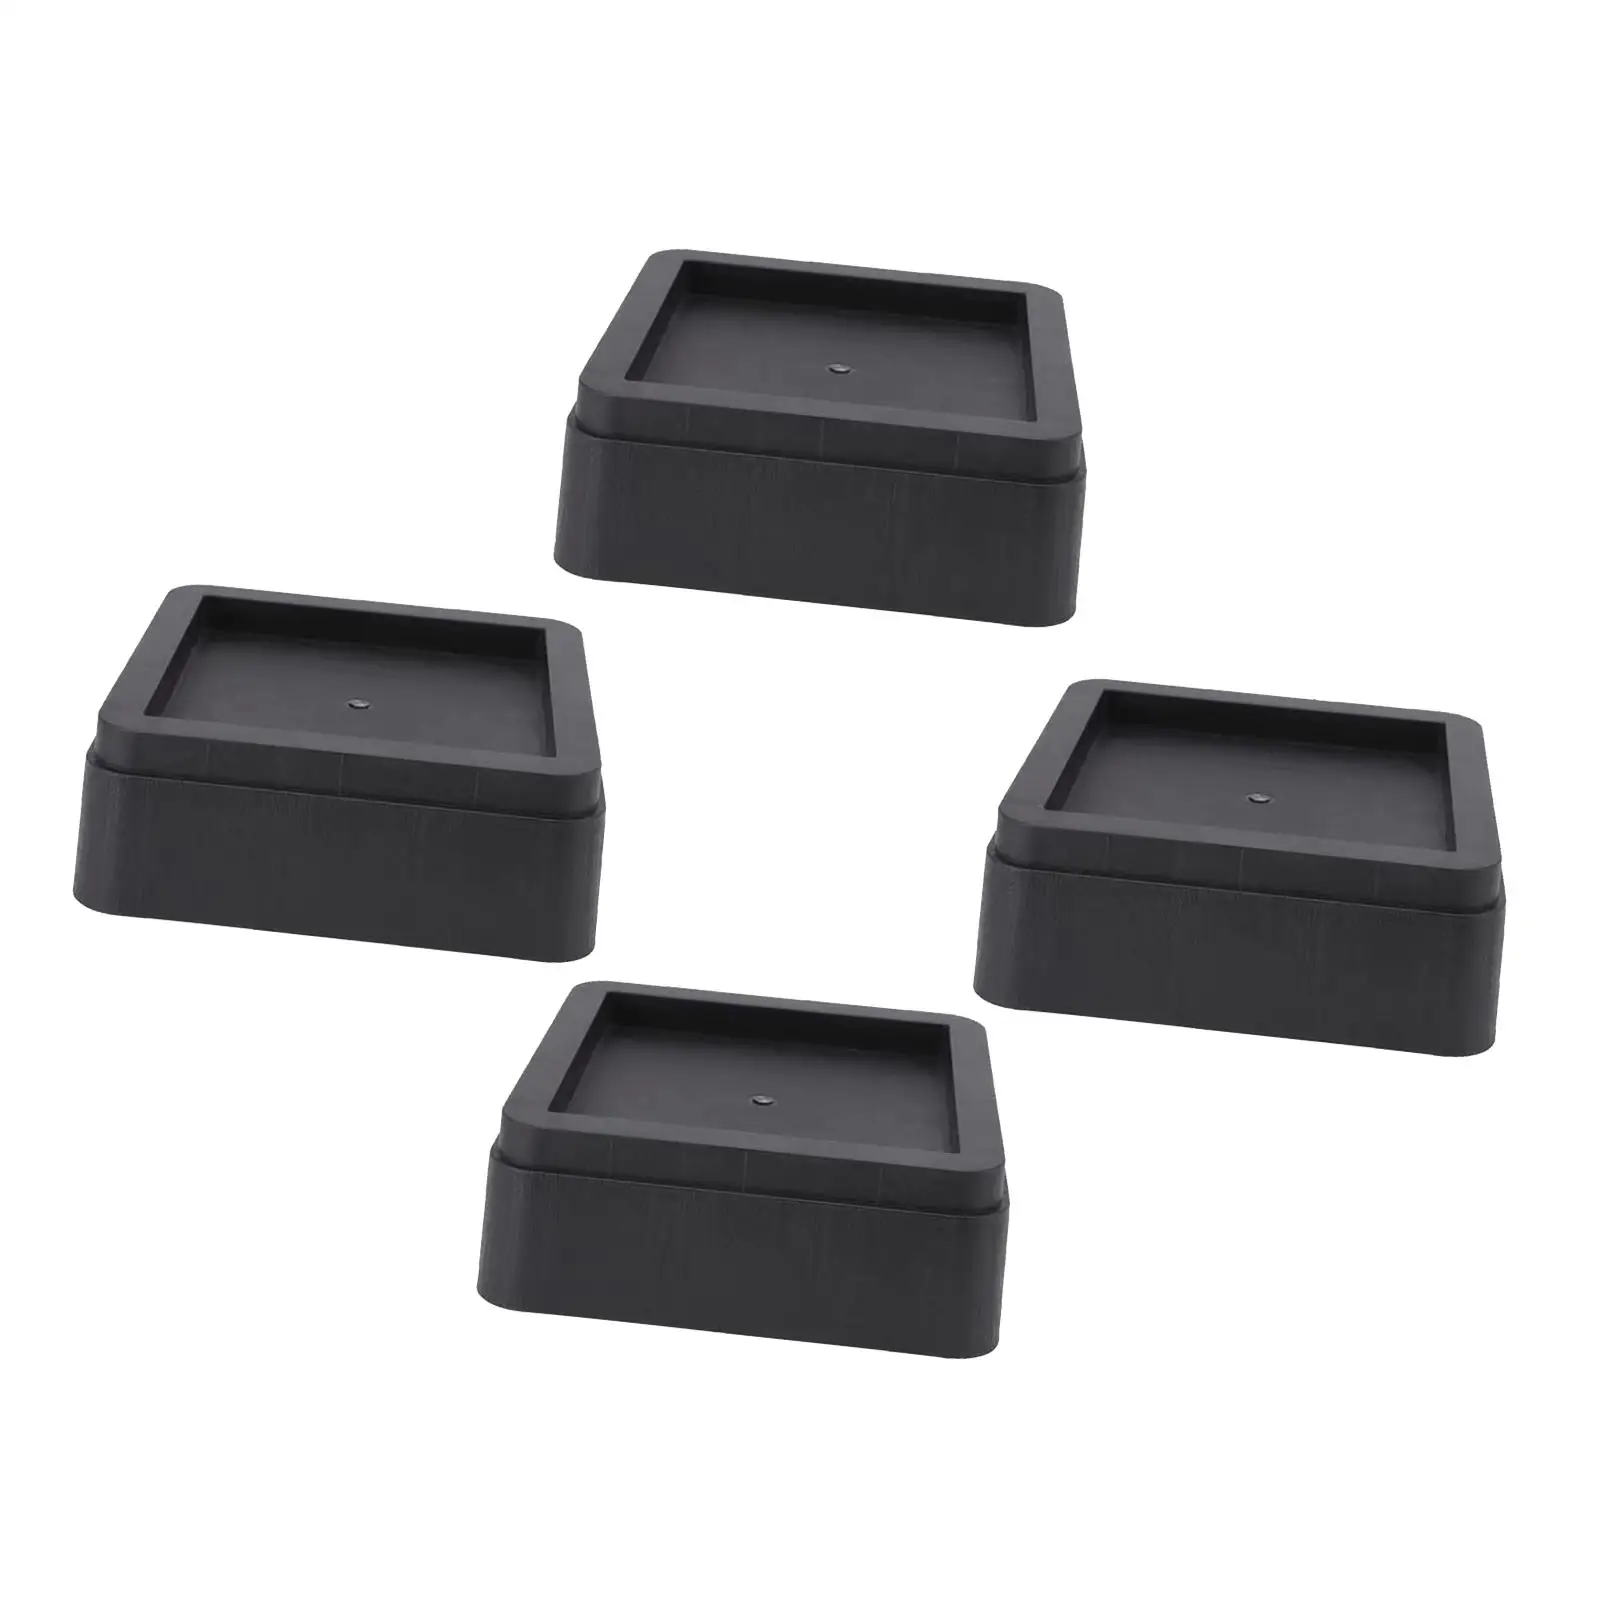 4Pcs Bed Risers Furniture Leg Risers Supports up to 11000 lbs Square Bed Raising Blocks for Sofa Couch Chair Washing Machine Bed